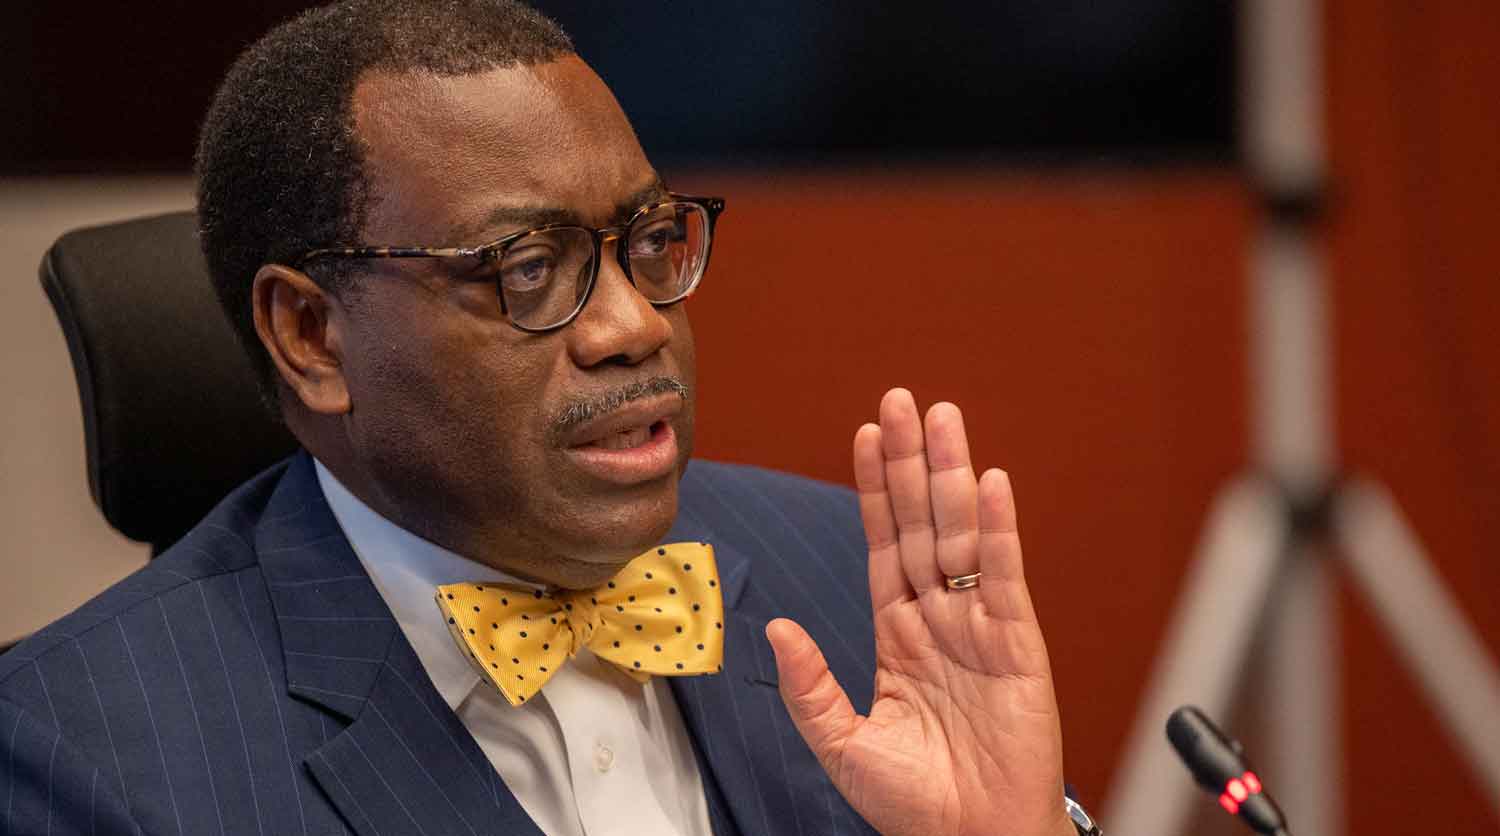 AKINWUMI ADESINA AND HEADS OF AFRICAN REGIONAL AND CONTINENTAL INSTITUTIONS AFFIRM SOLIDARITY ON MOVING AFRICA FORWARD